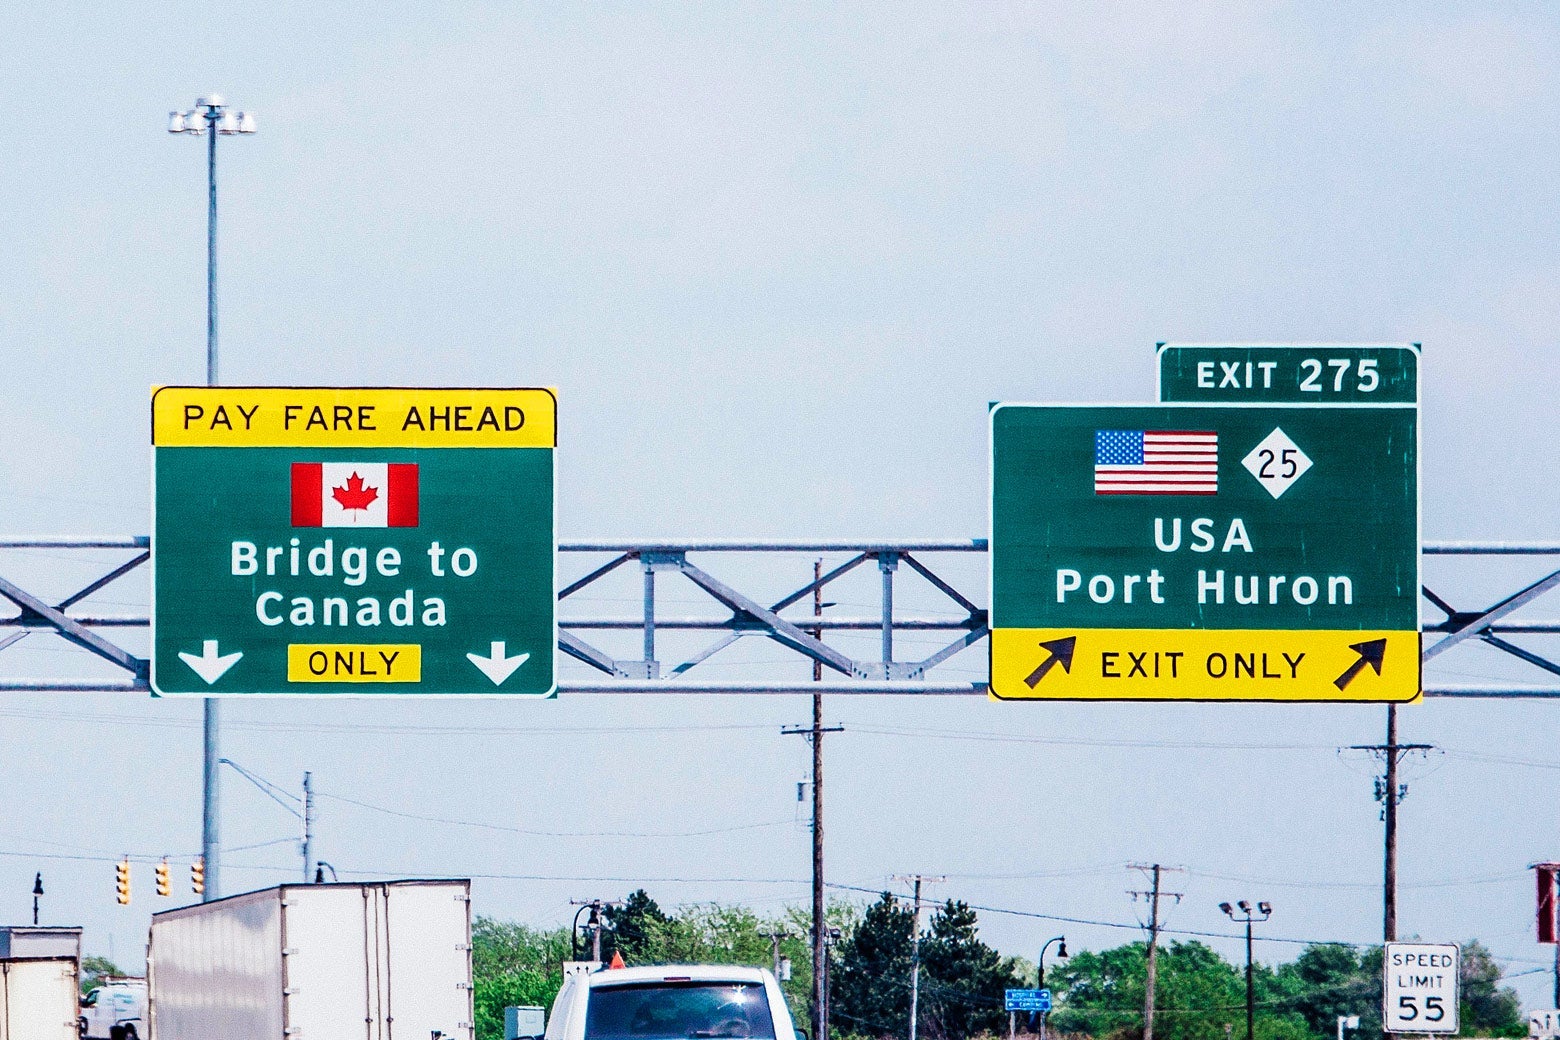 Highway signs show the way to the Bridge of Canada and Port Huron.